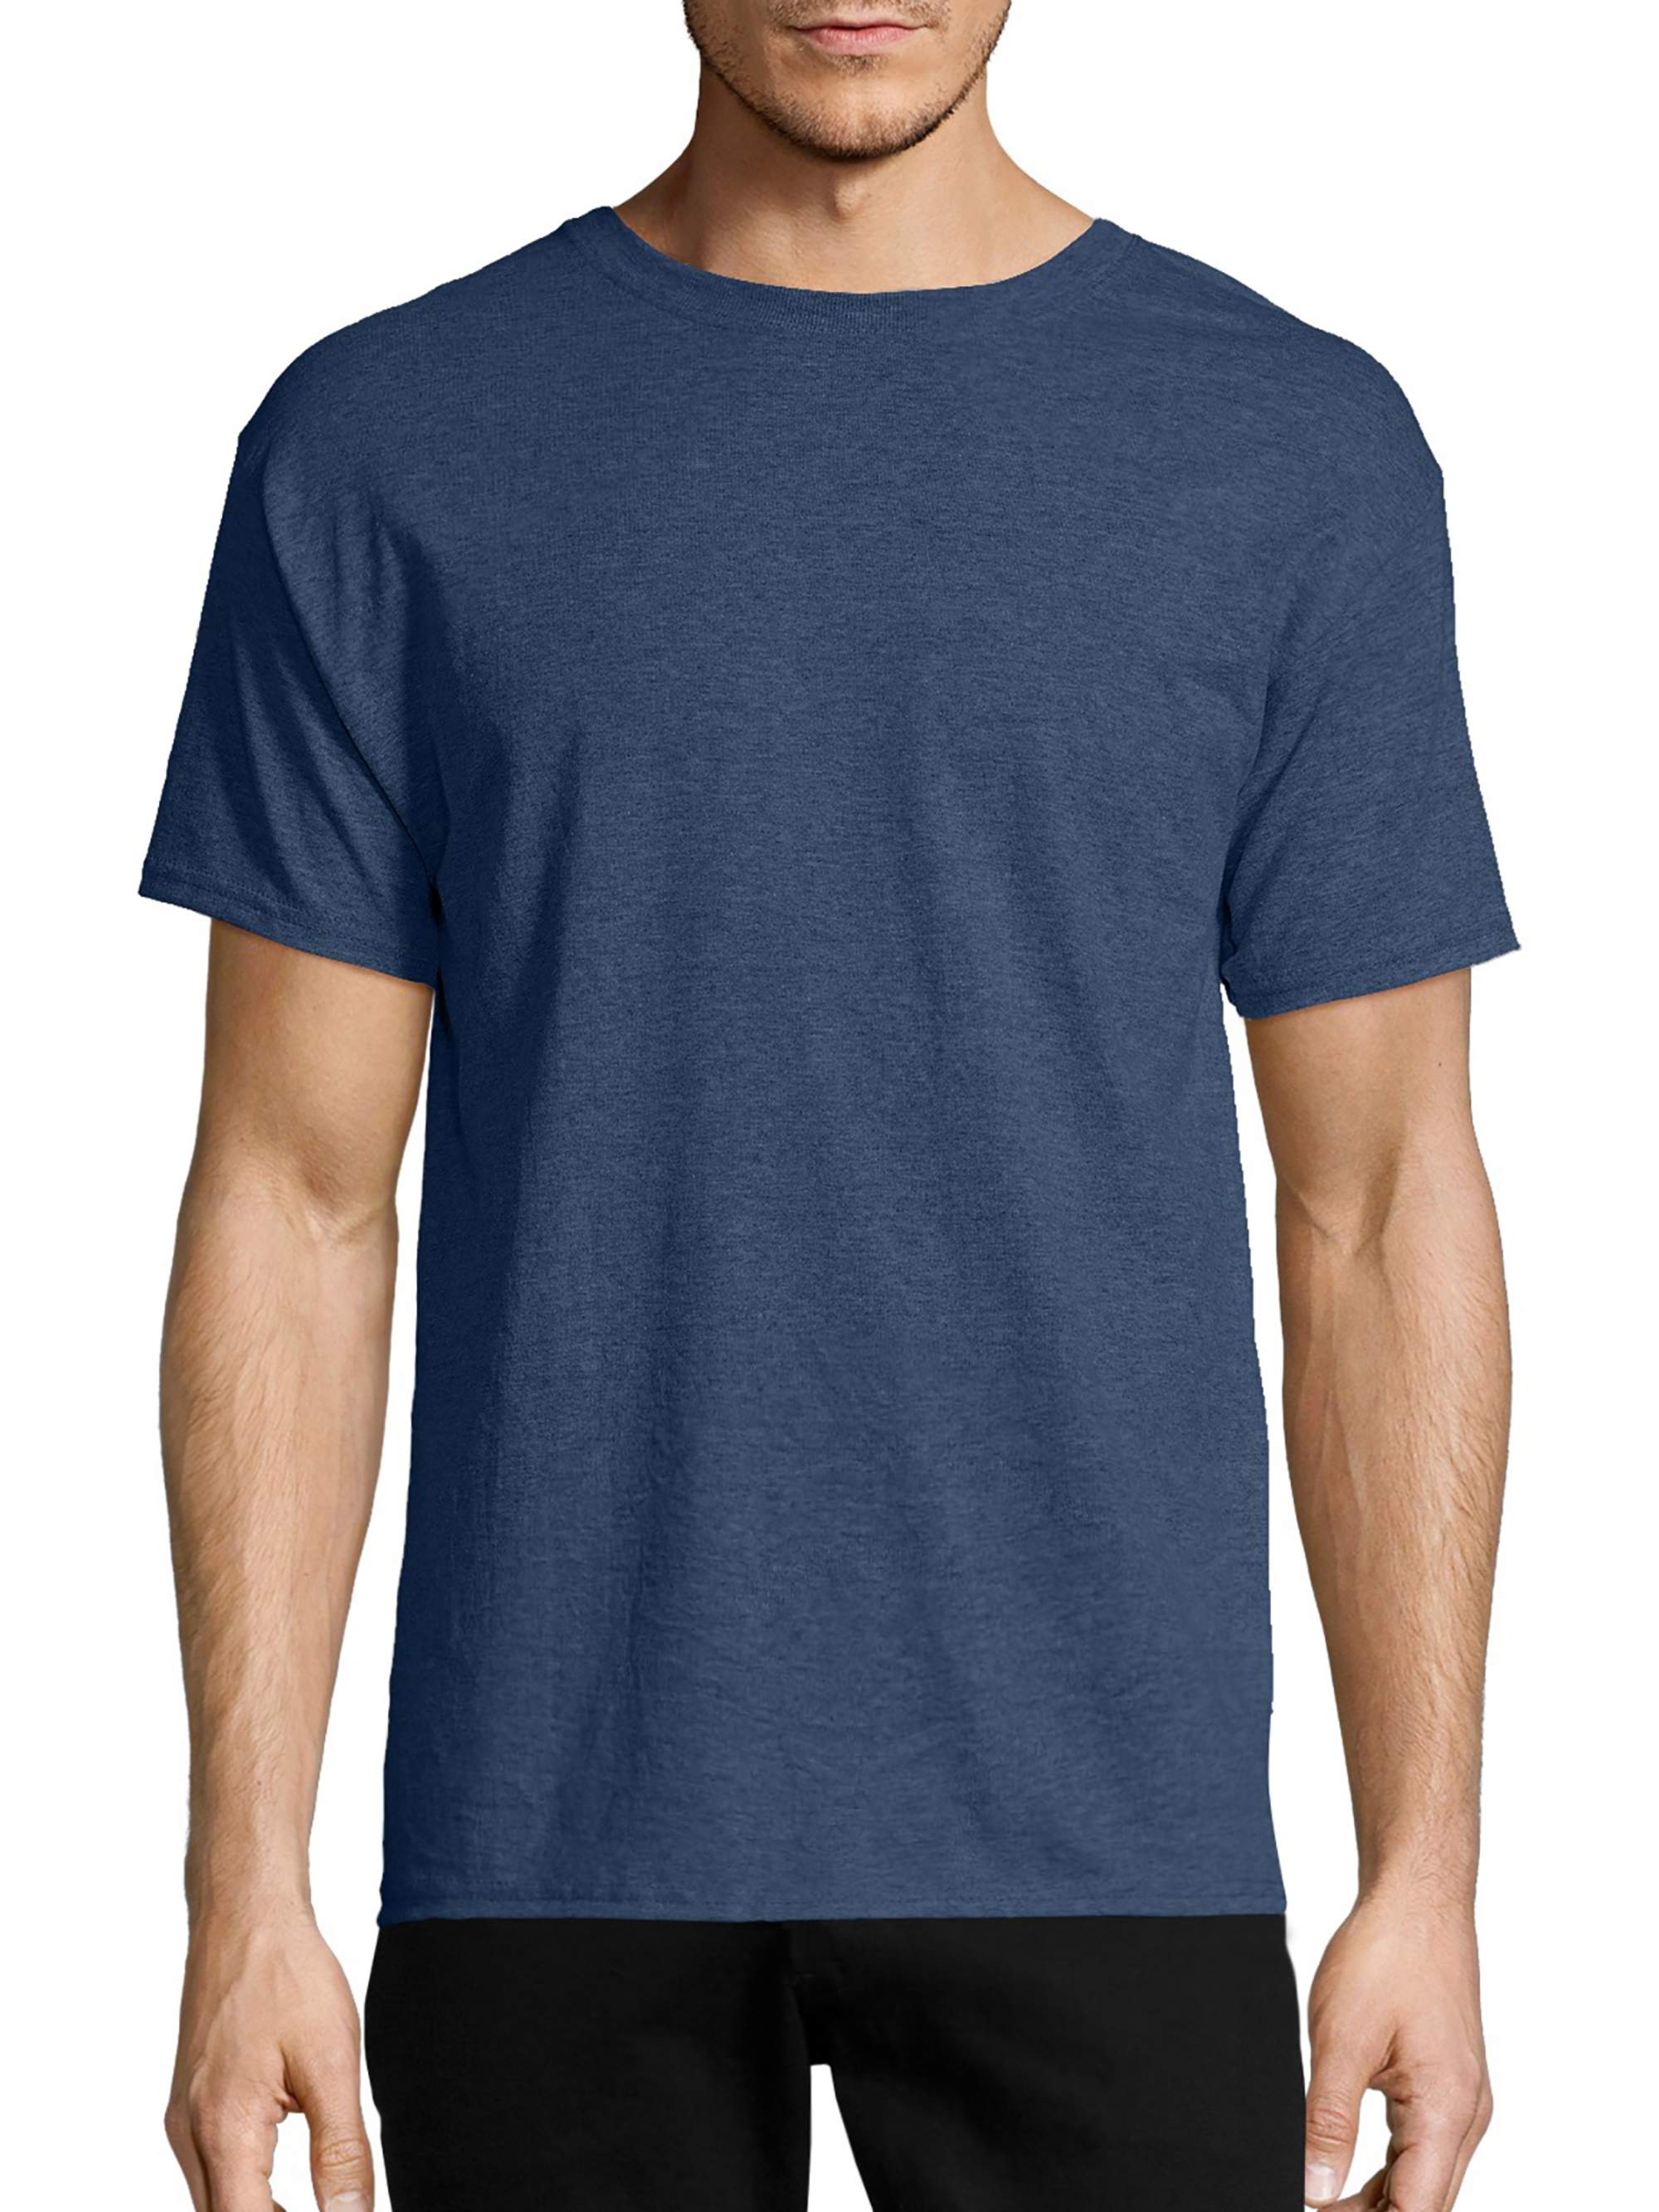 Hanes Men's and Big Men's Ecosmart Short Sleeve Tee, Up To Size 3XL - image 1 of 5